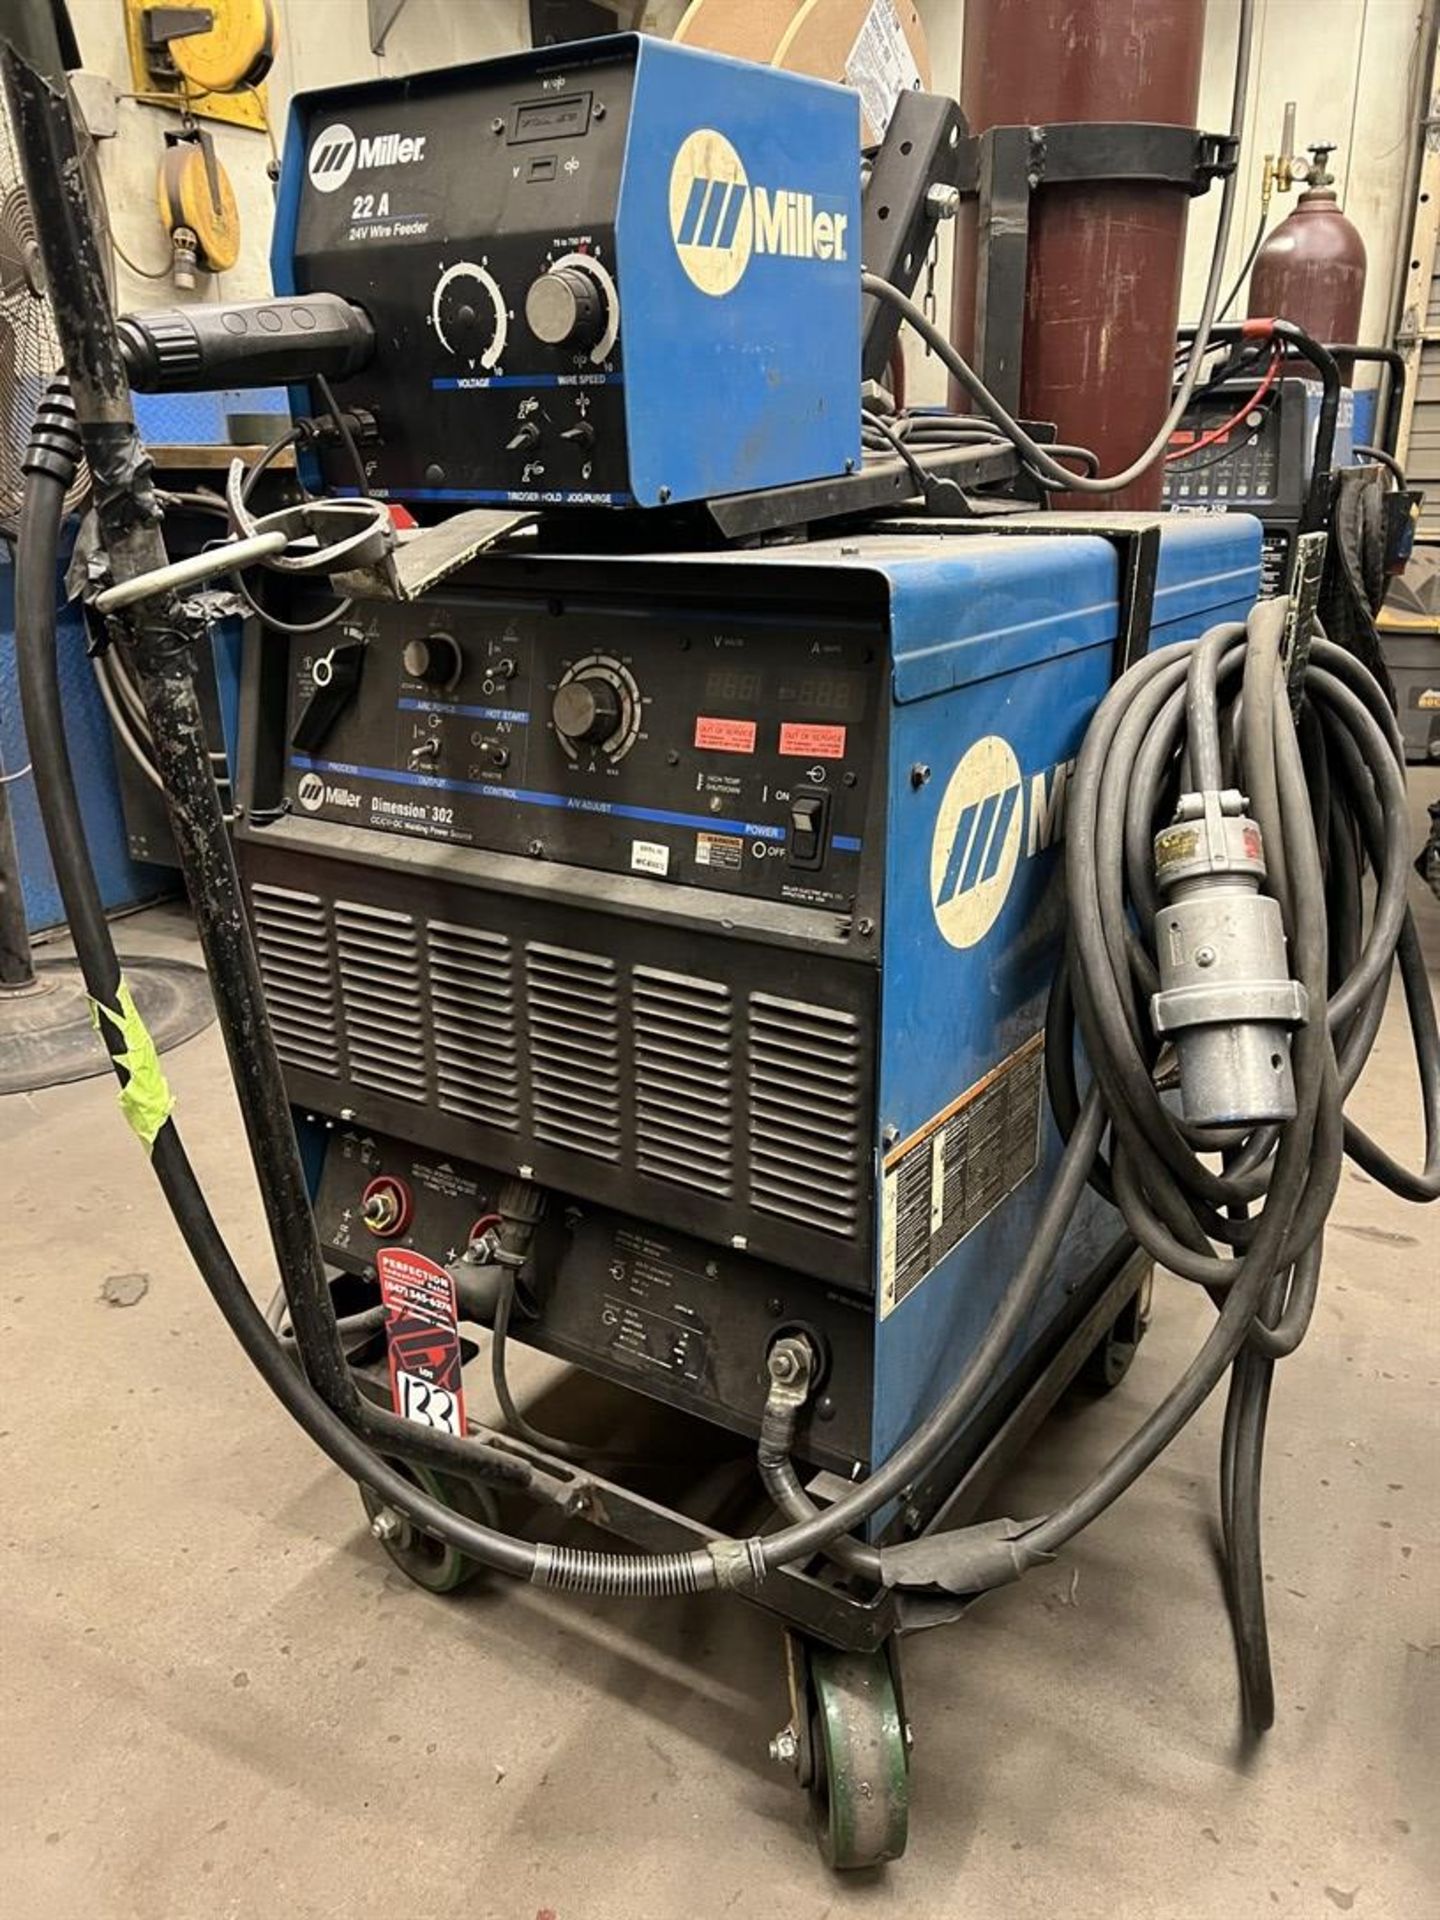 MILLER Dimension 302 Mig Welder, s/n MC430087C, w/ Miller 22A Wire Feed - Image 2 of 5